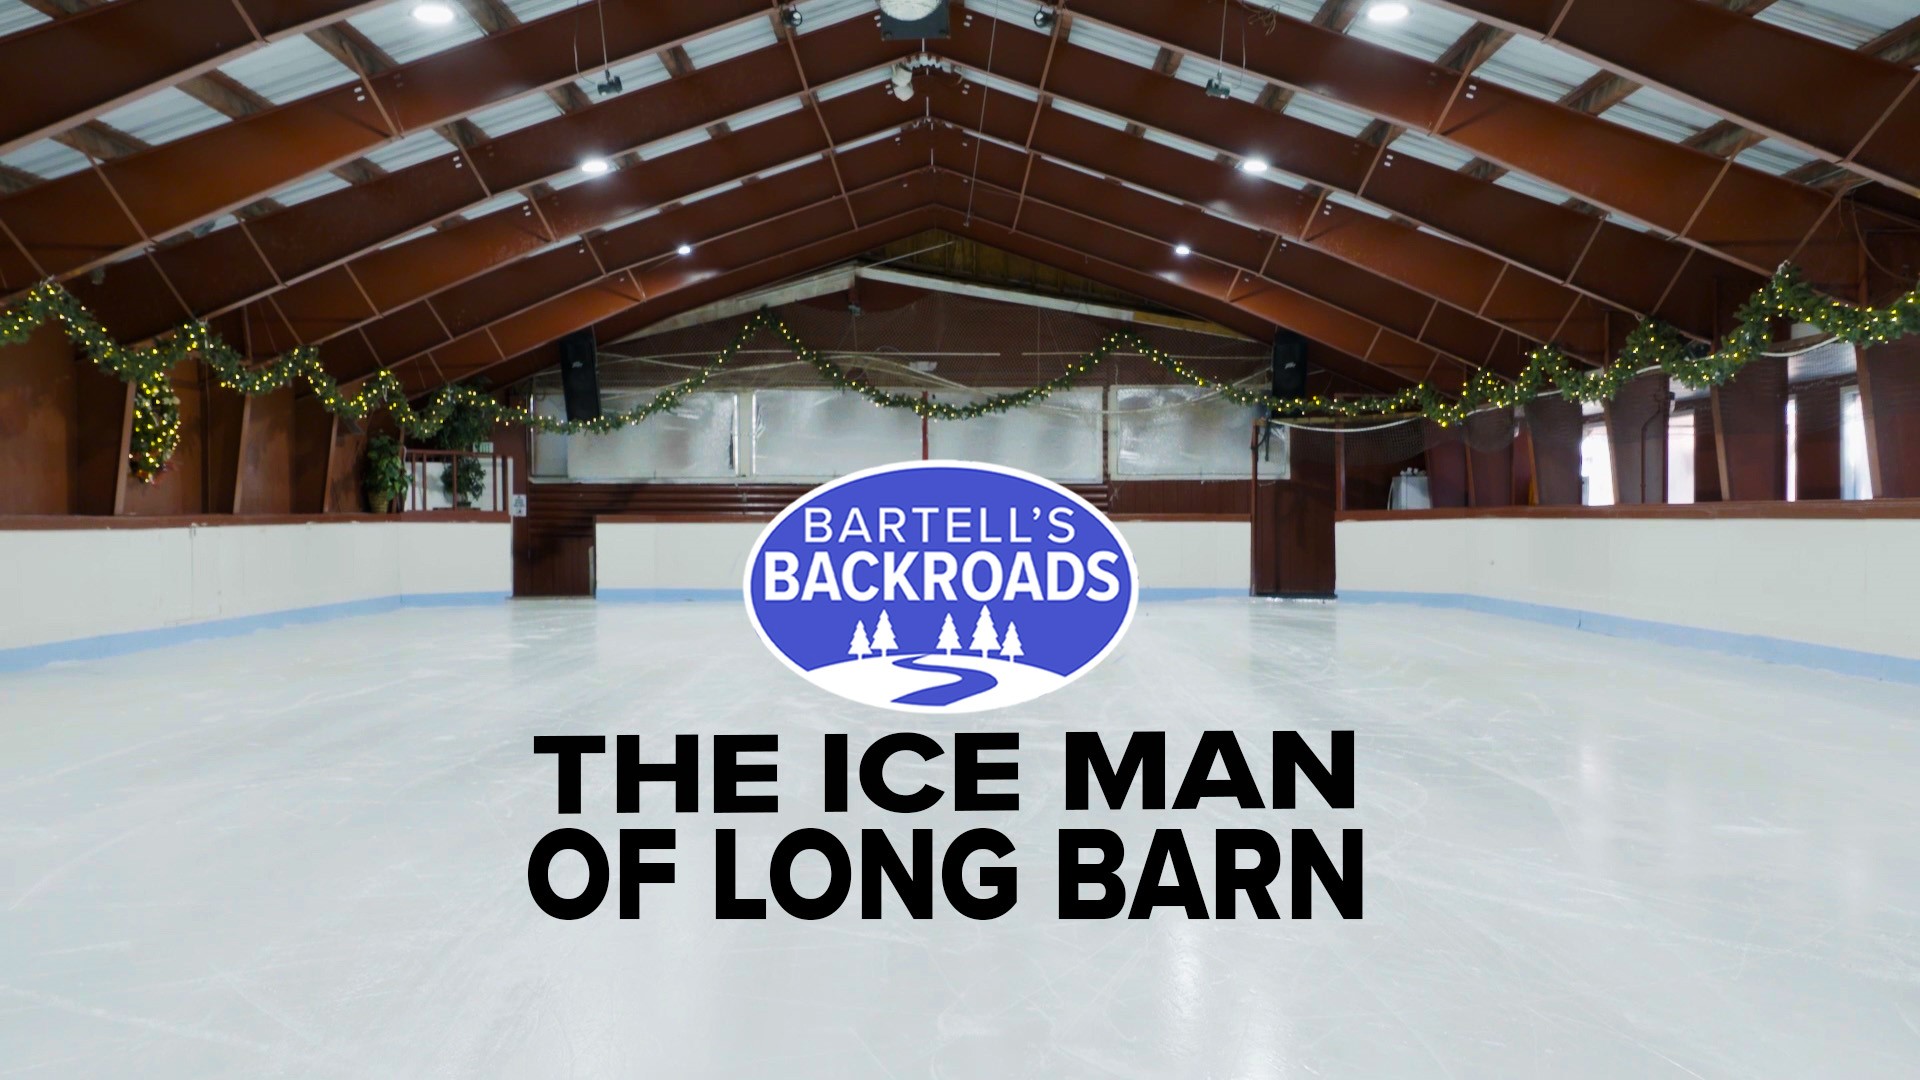 It's the icing on any visit to Long Barn. Meet the man who's kept Tuolumne County's oldest skating rink running for over 40 years.